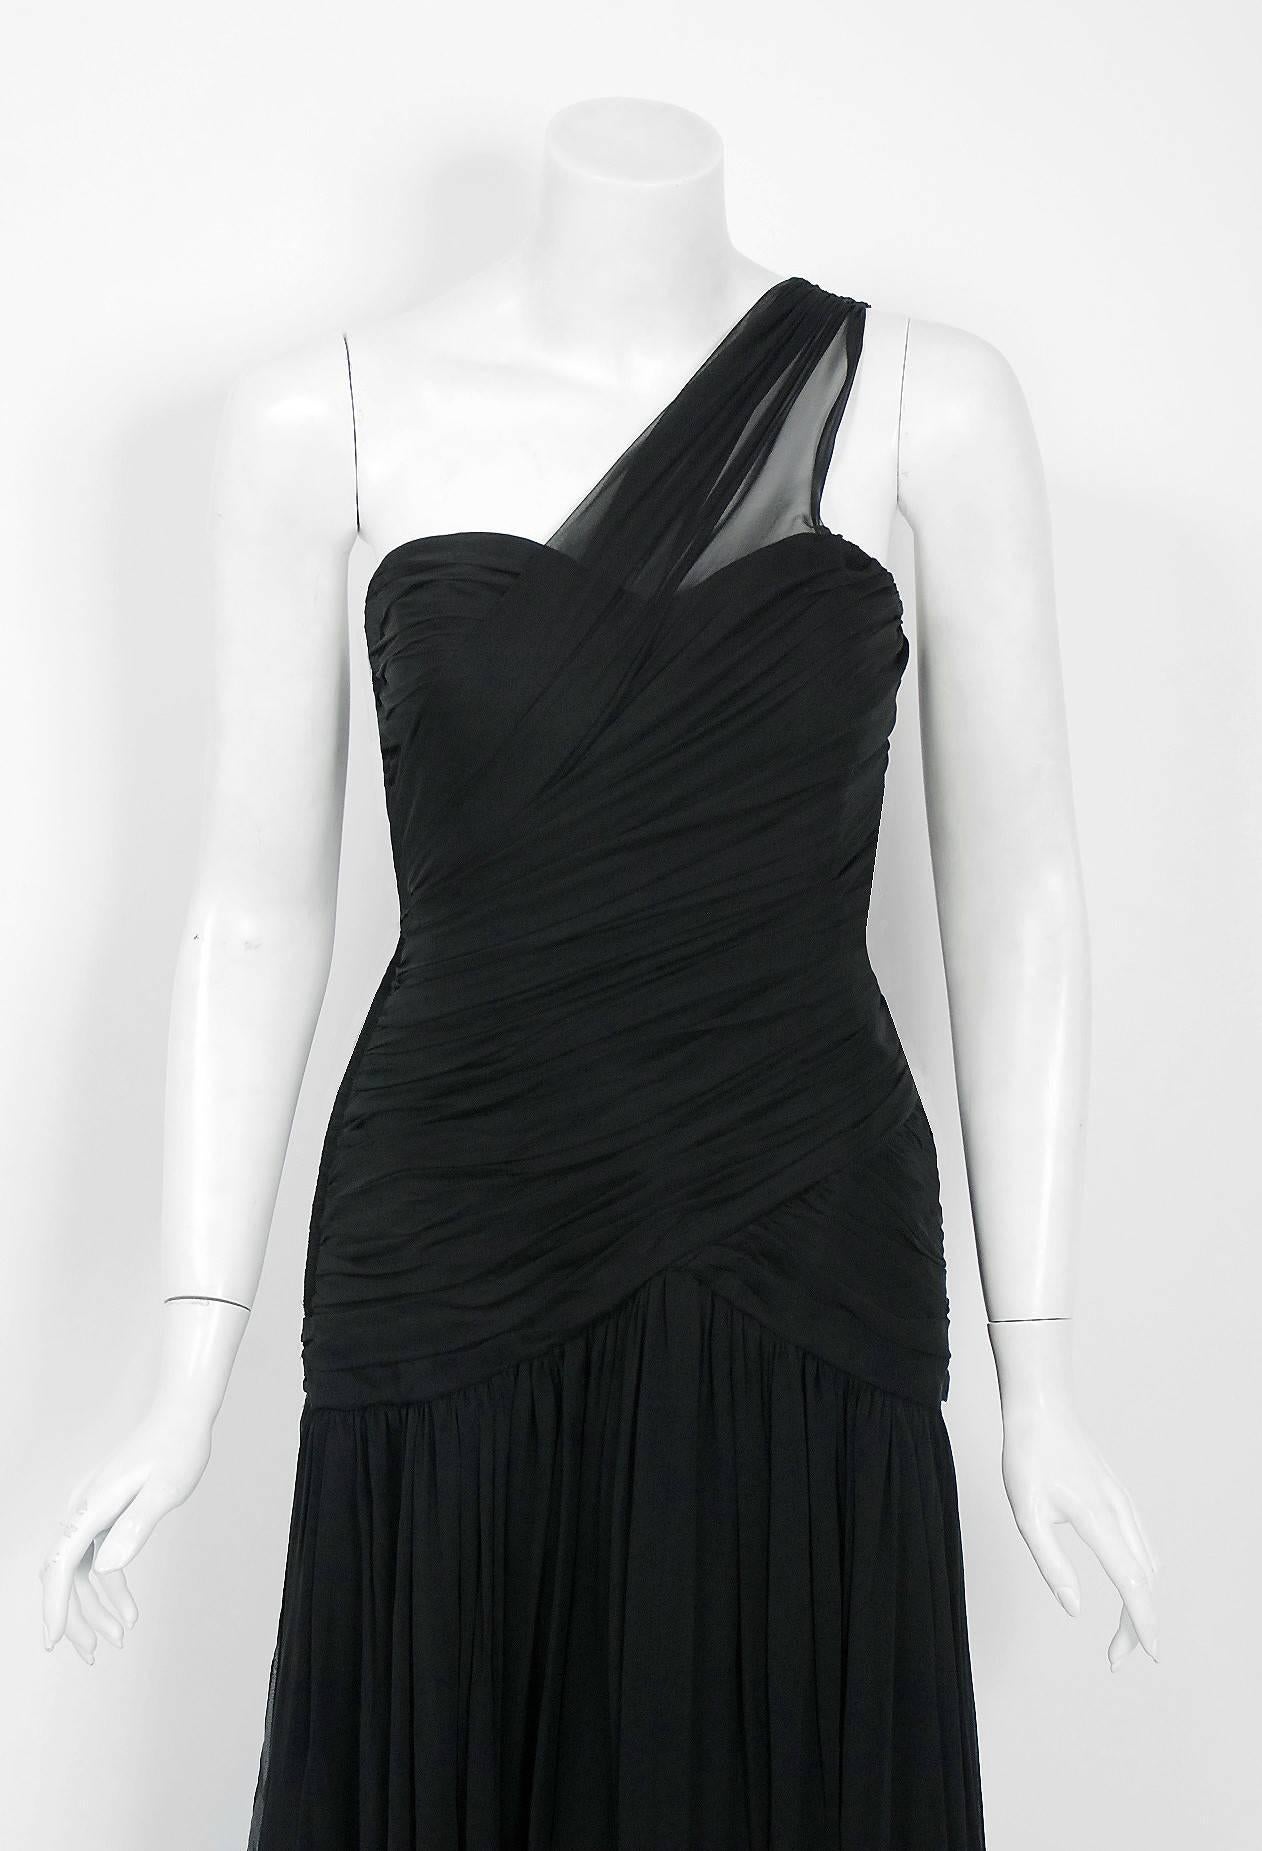 This breathtaking Adele Simpson designer gown, dating back to mid 1970's, is perhaps the most unique and flattering black dress I have ever seen. Fashioned from light-weight silk chiffon, the fabric feels like heaven against the  skin. The bodice is